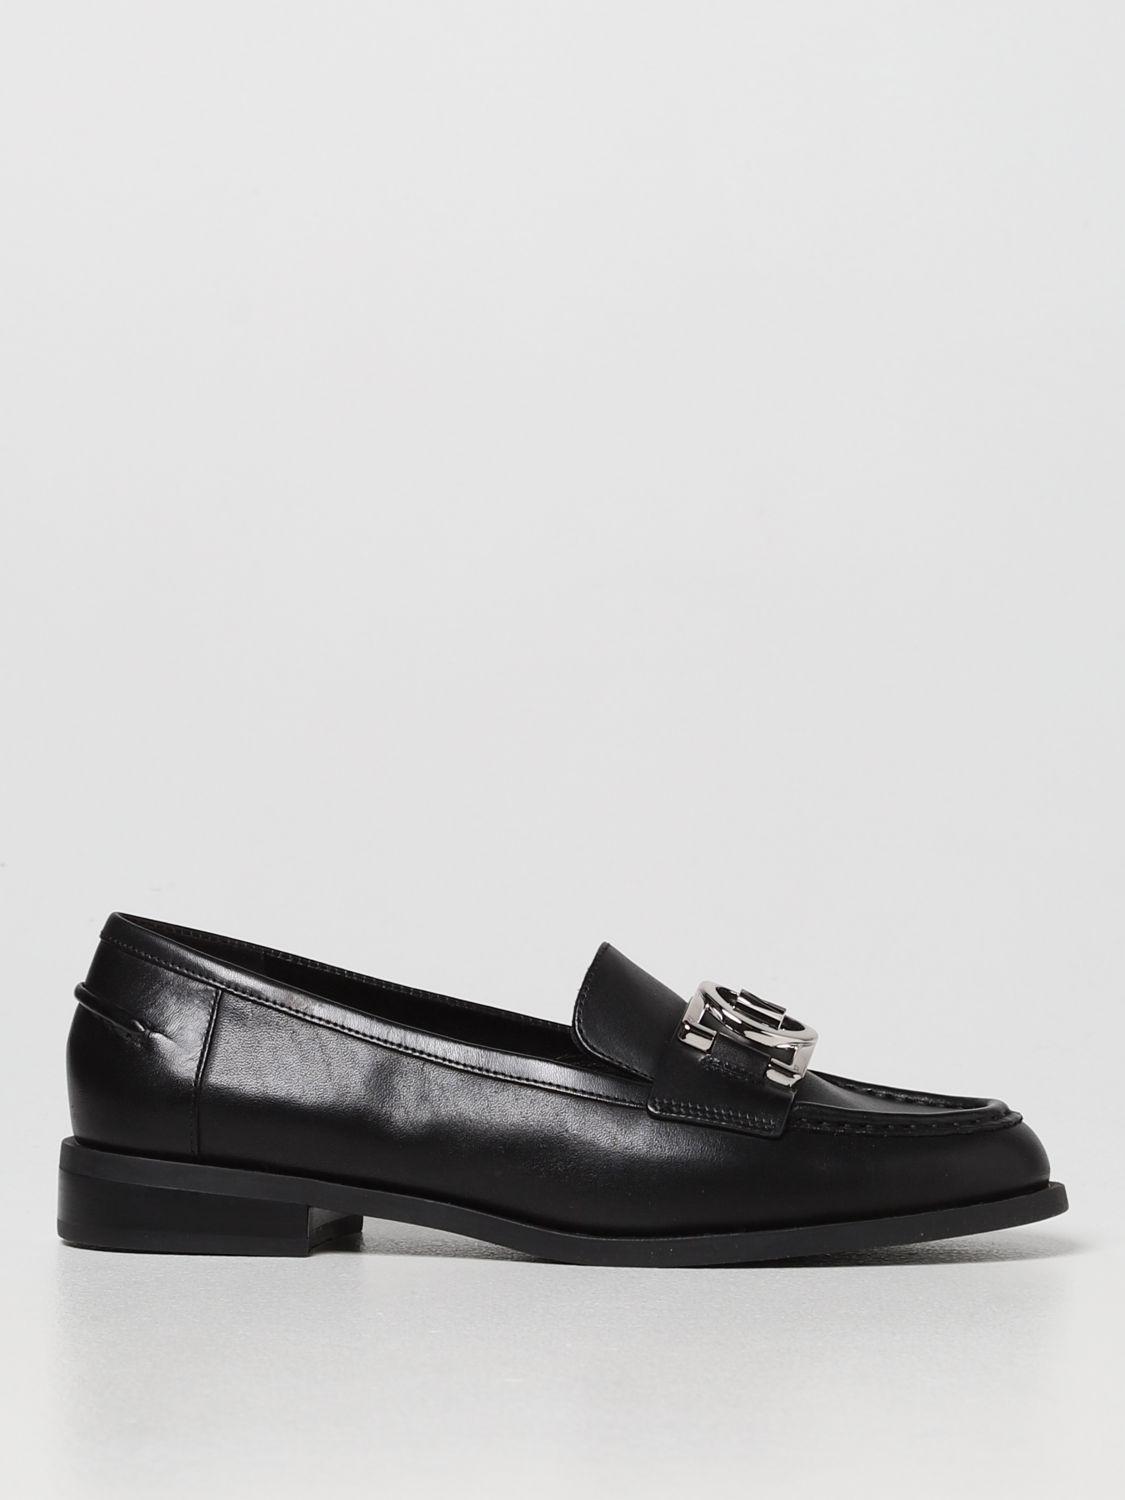 Michael Kors Loafers in Black | Lyst